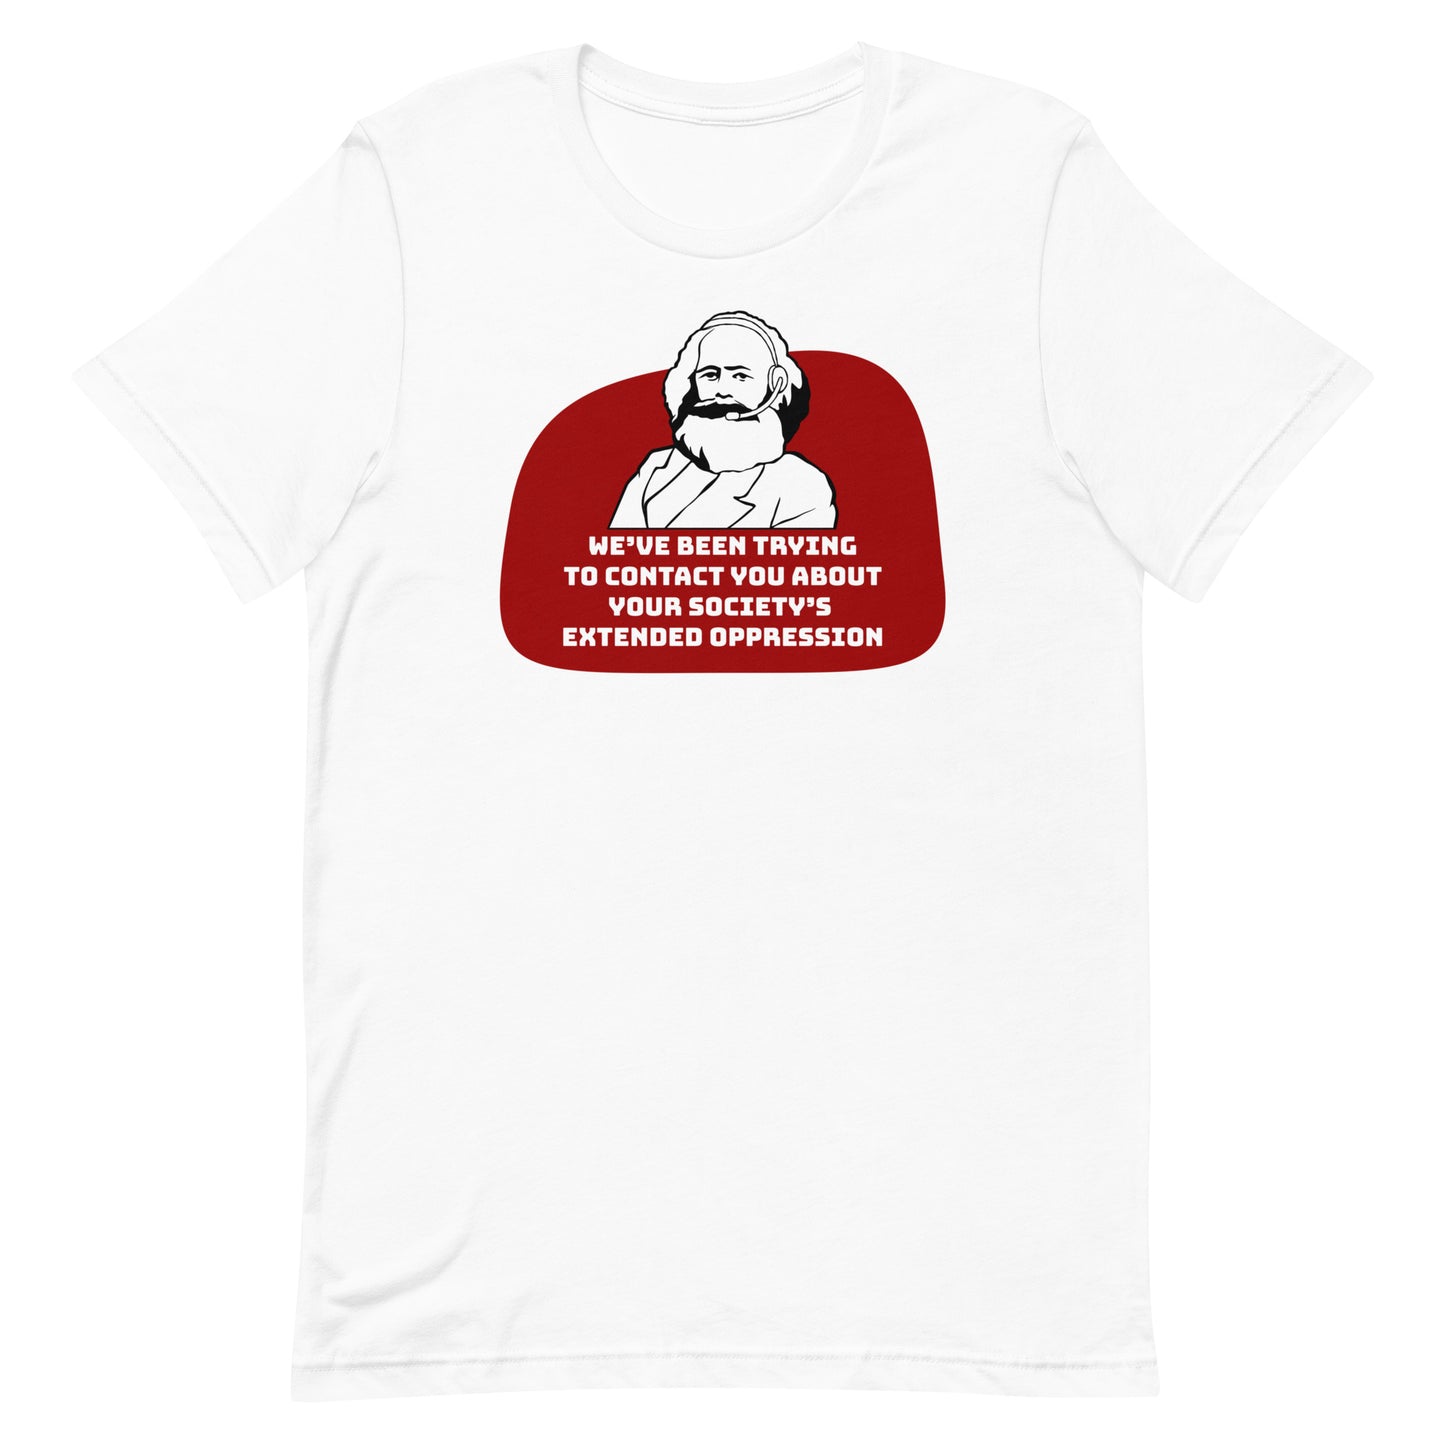 A white crewneck t-shirt featuring a black and white illustration of Karl Marx wearing a telemarketer headset. Text beneath Marx reads "We've been trying to contact you about your society's extended oppression." in a blocky font.